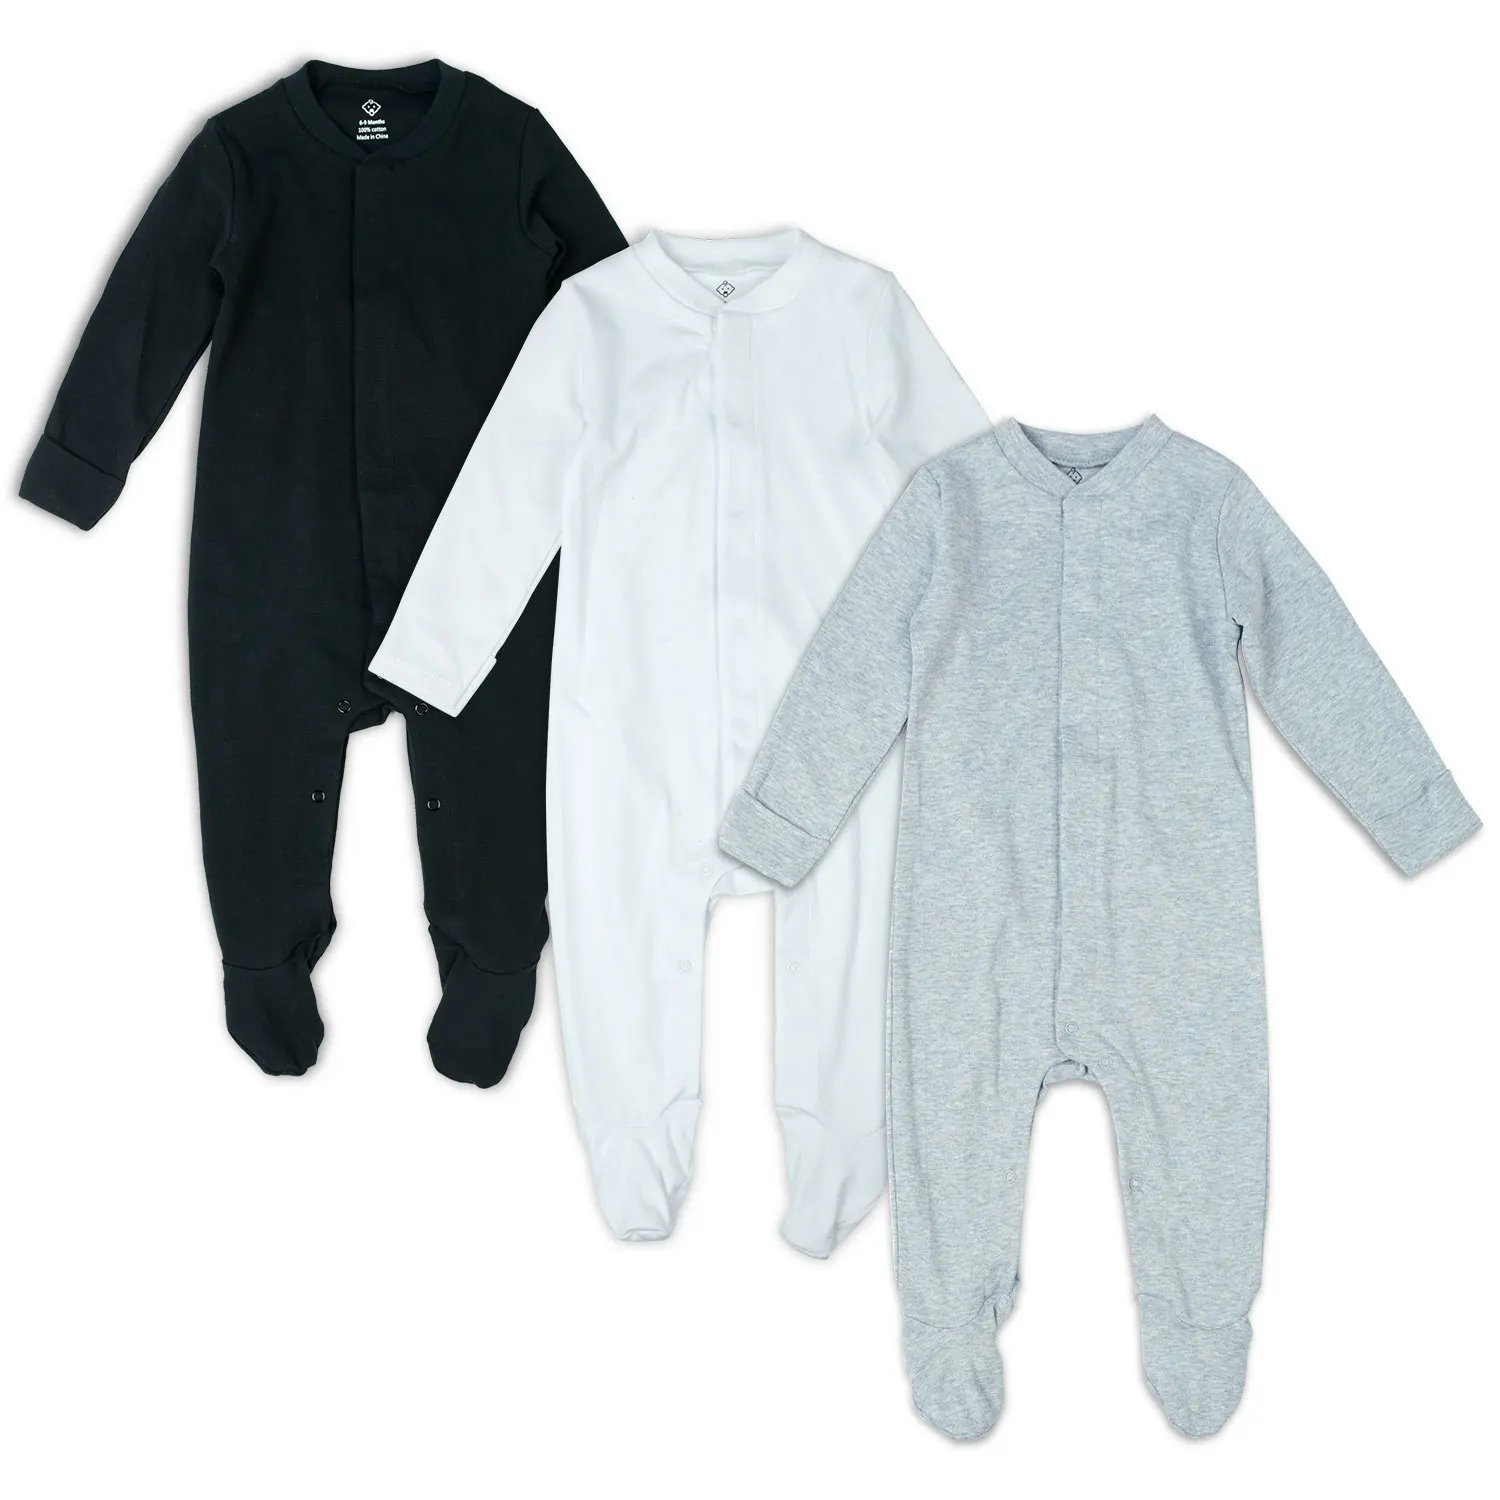 

Wholesale Cheap baby footie pajamas long sleeve jumpsuit romper baby solid color cotton newborn baby clothes romper, Black,white,grey